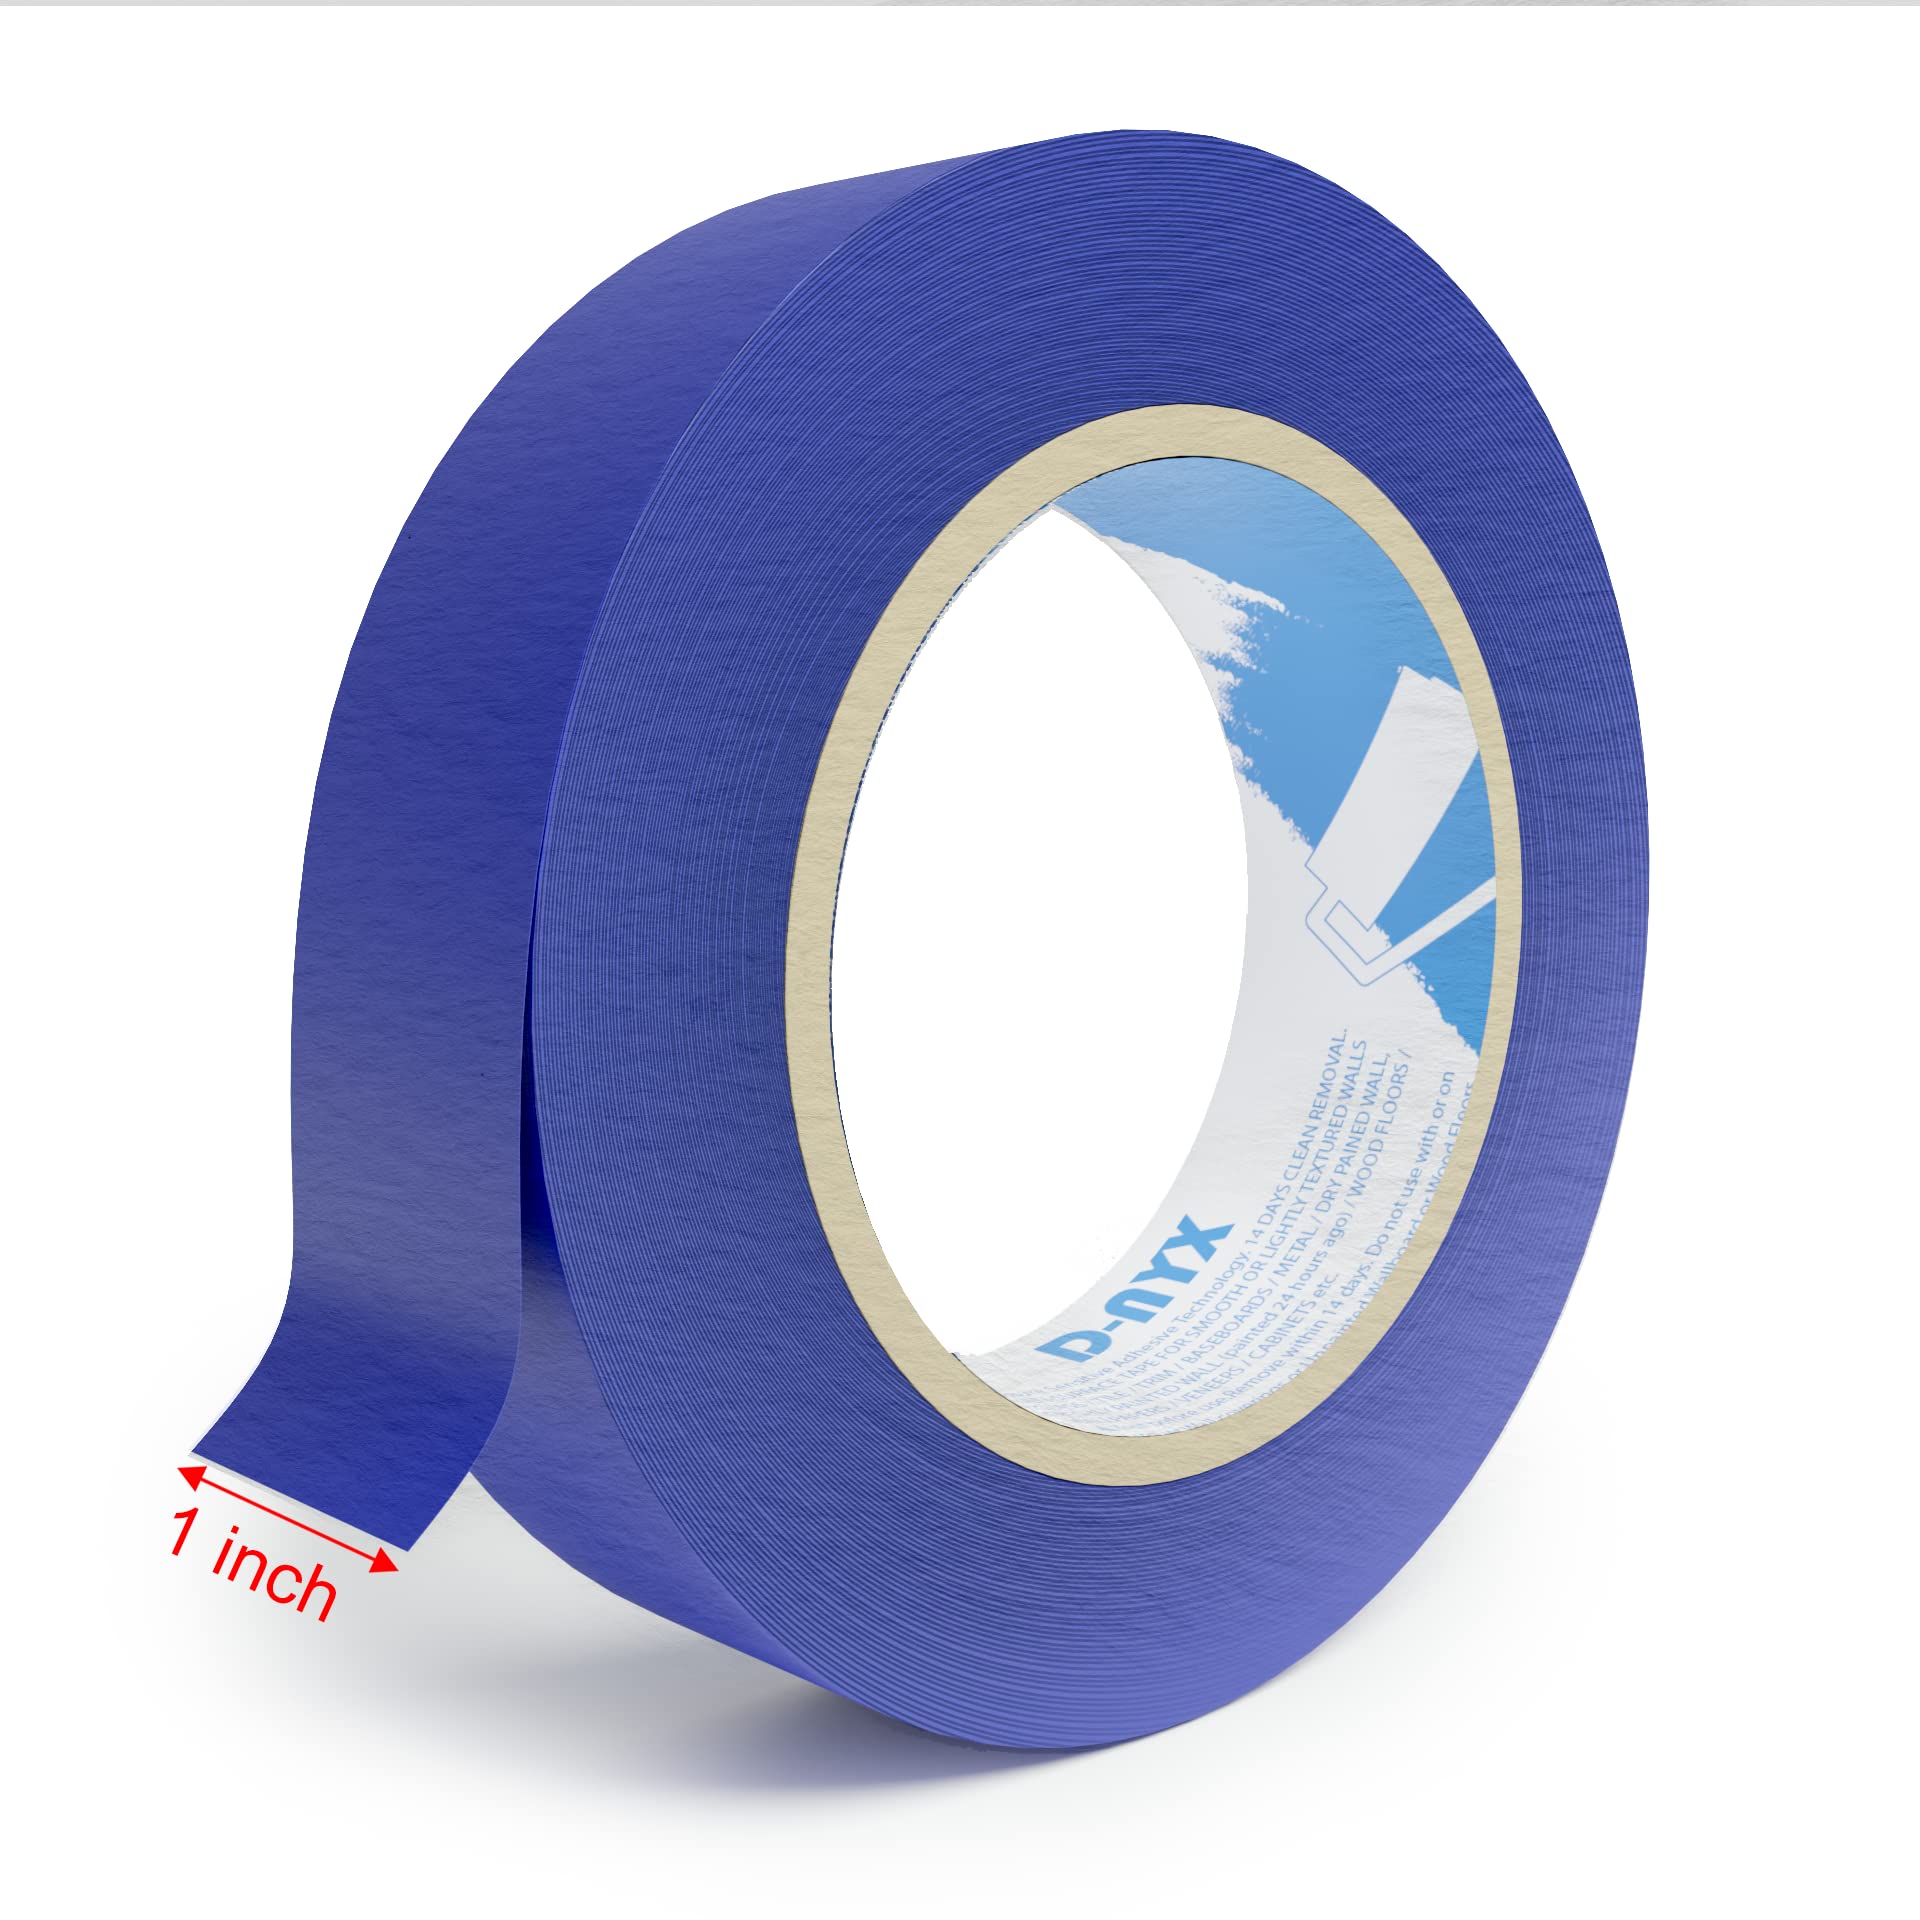 3 Pack Professional Painters Tape 1inch x 60 Yards | Sharp Edge Line Technology - Residue-Free MultiSurface Painter Tape | Automotive Refinish Paper Masking Paint Rolls for Wall Art Renovation Marking